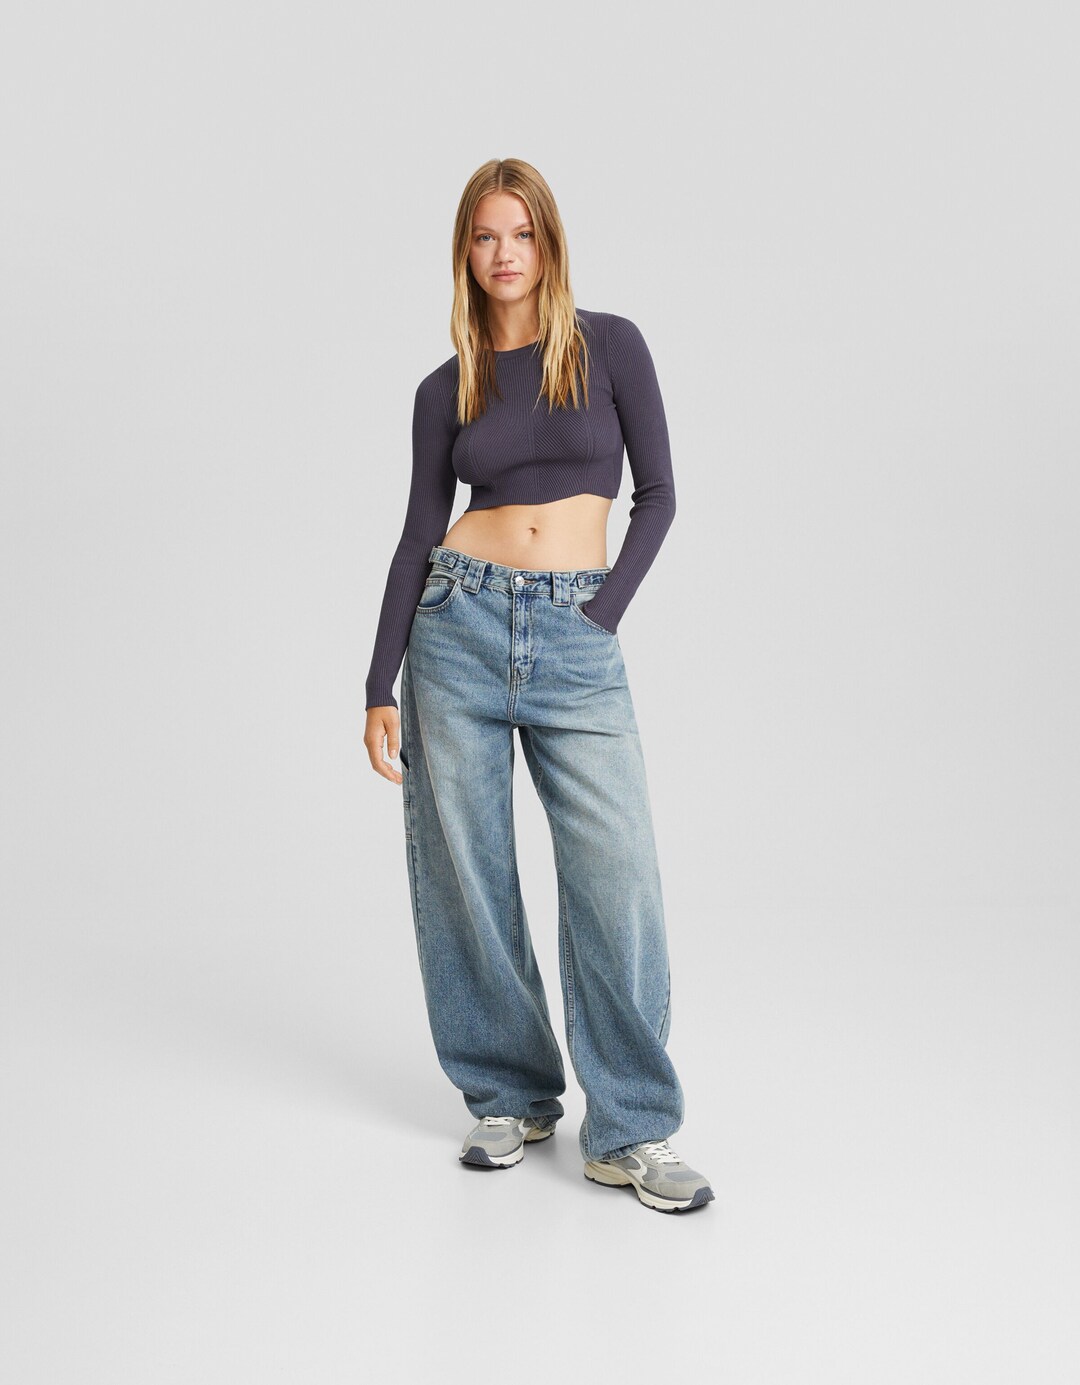 Cropped-Strickpullover mit Rippmuster